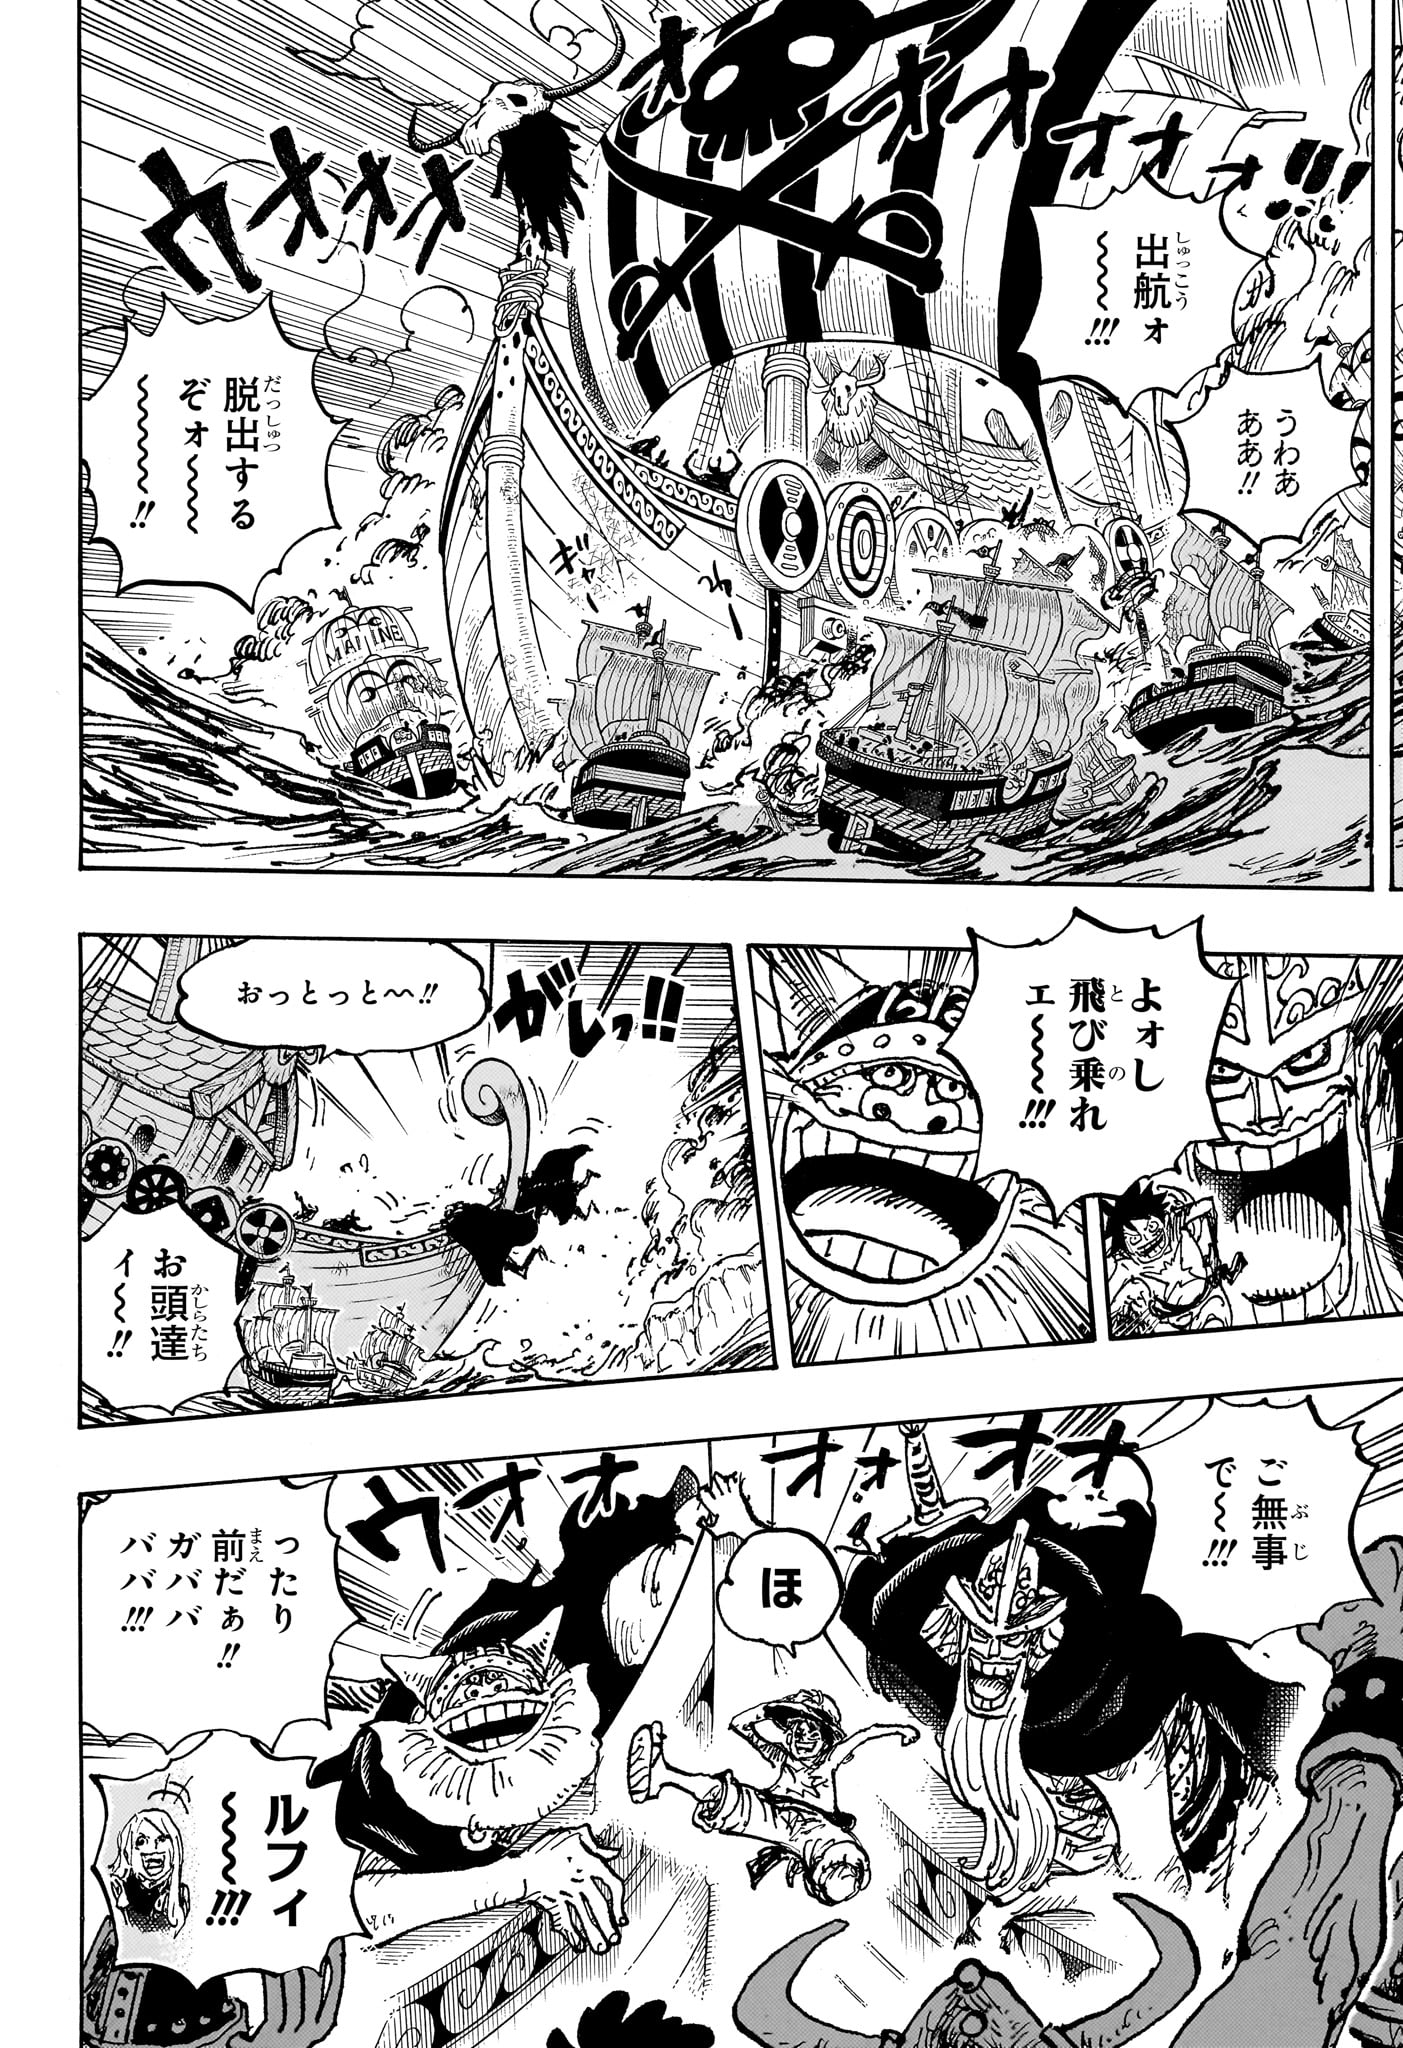 One Piece - Chapter 1118 - Page 6